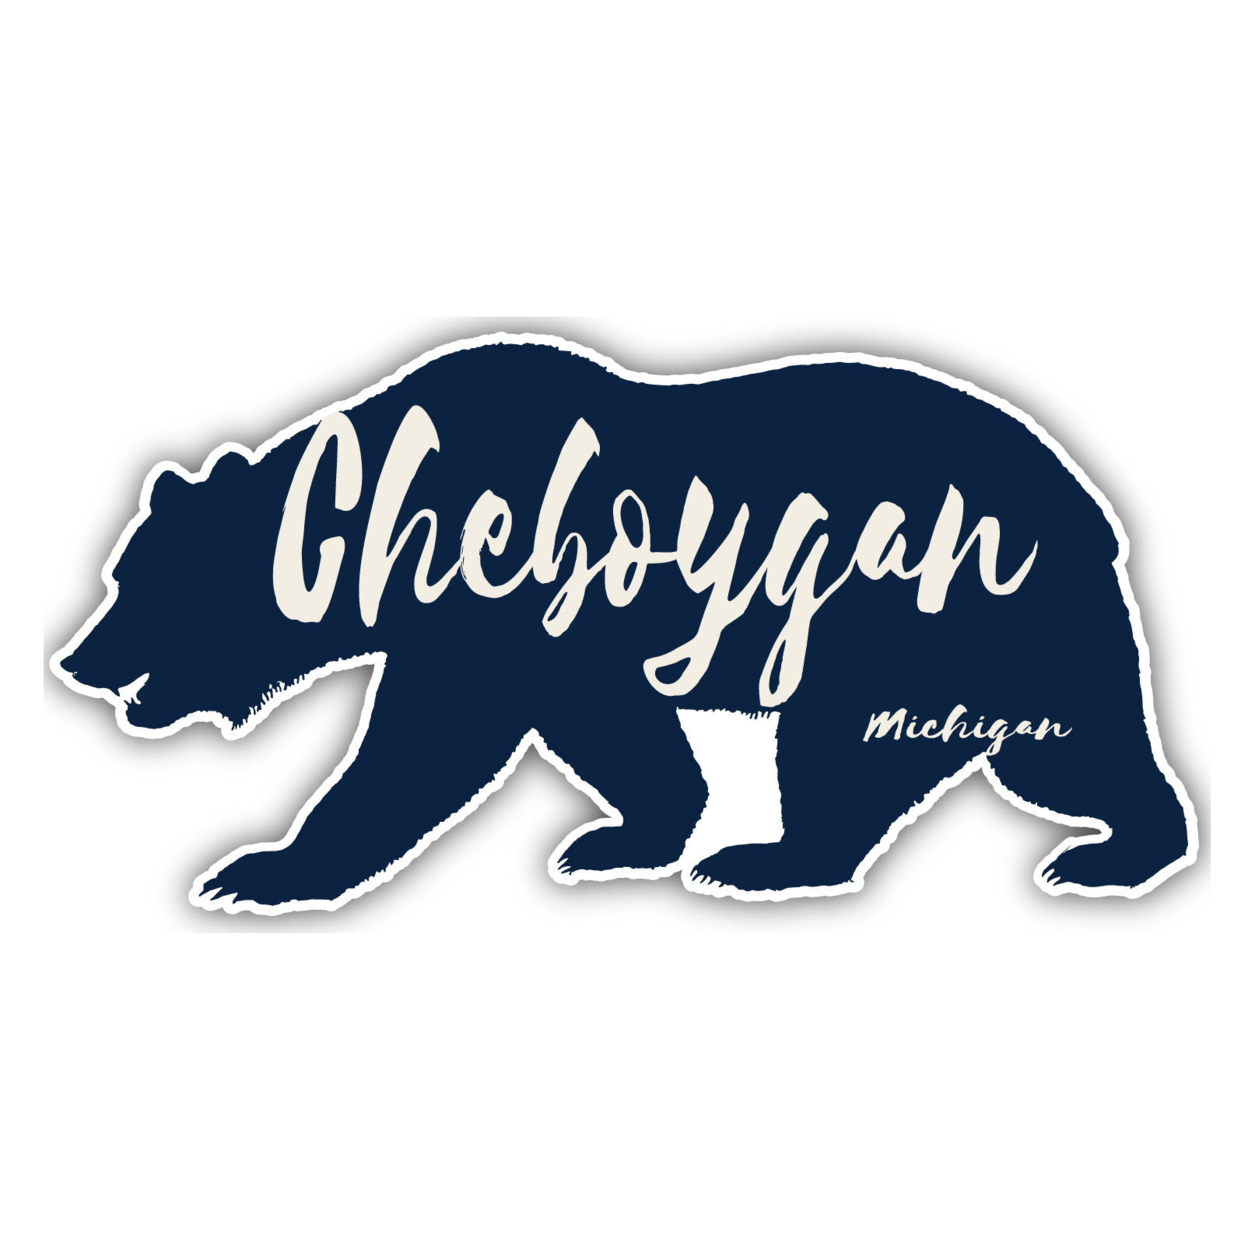 Cheboygan Michigan Souvenir Decorative Stickers (Choose Theme And Size) - 4-Pack, 8-Inch, Great Outdoors